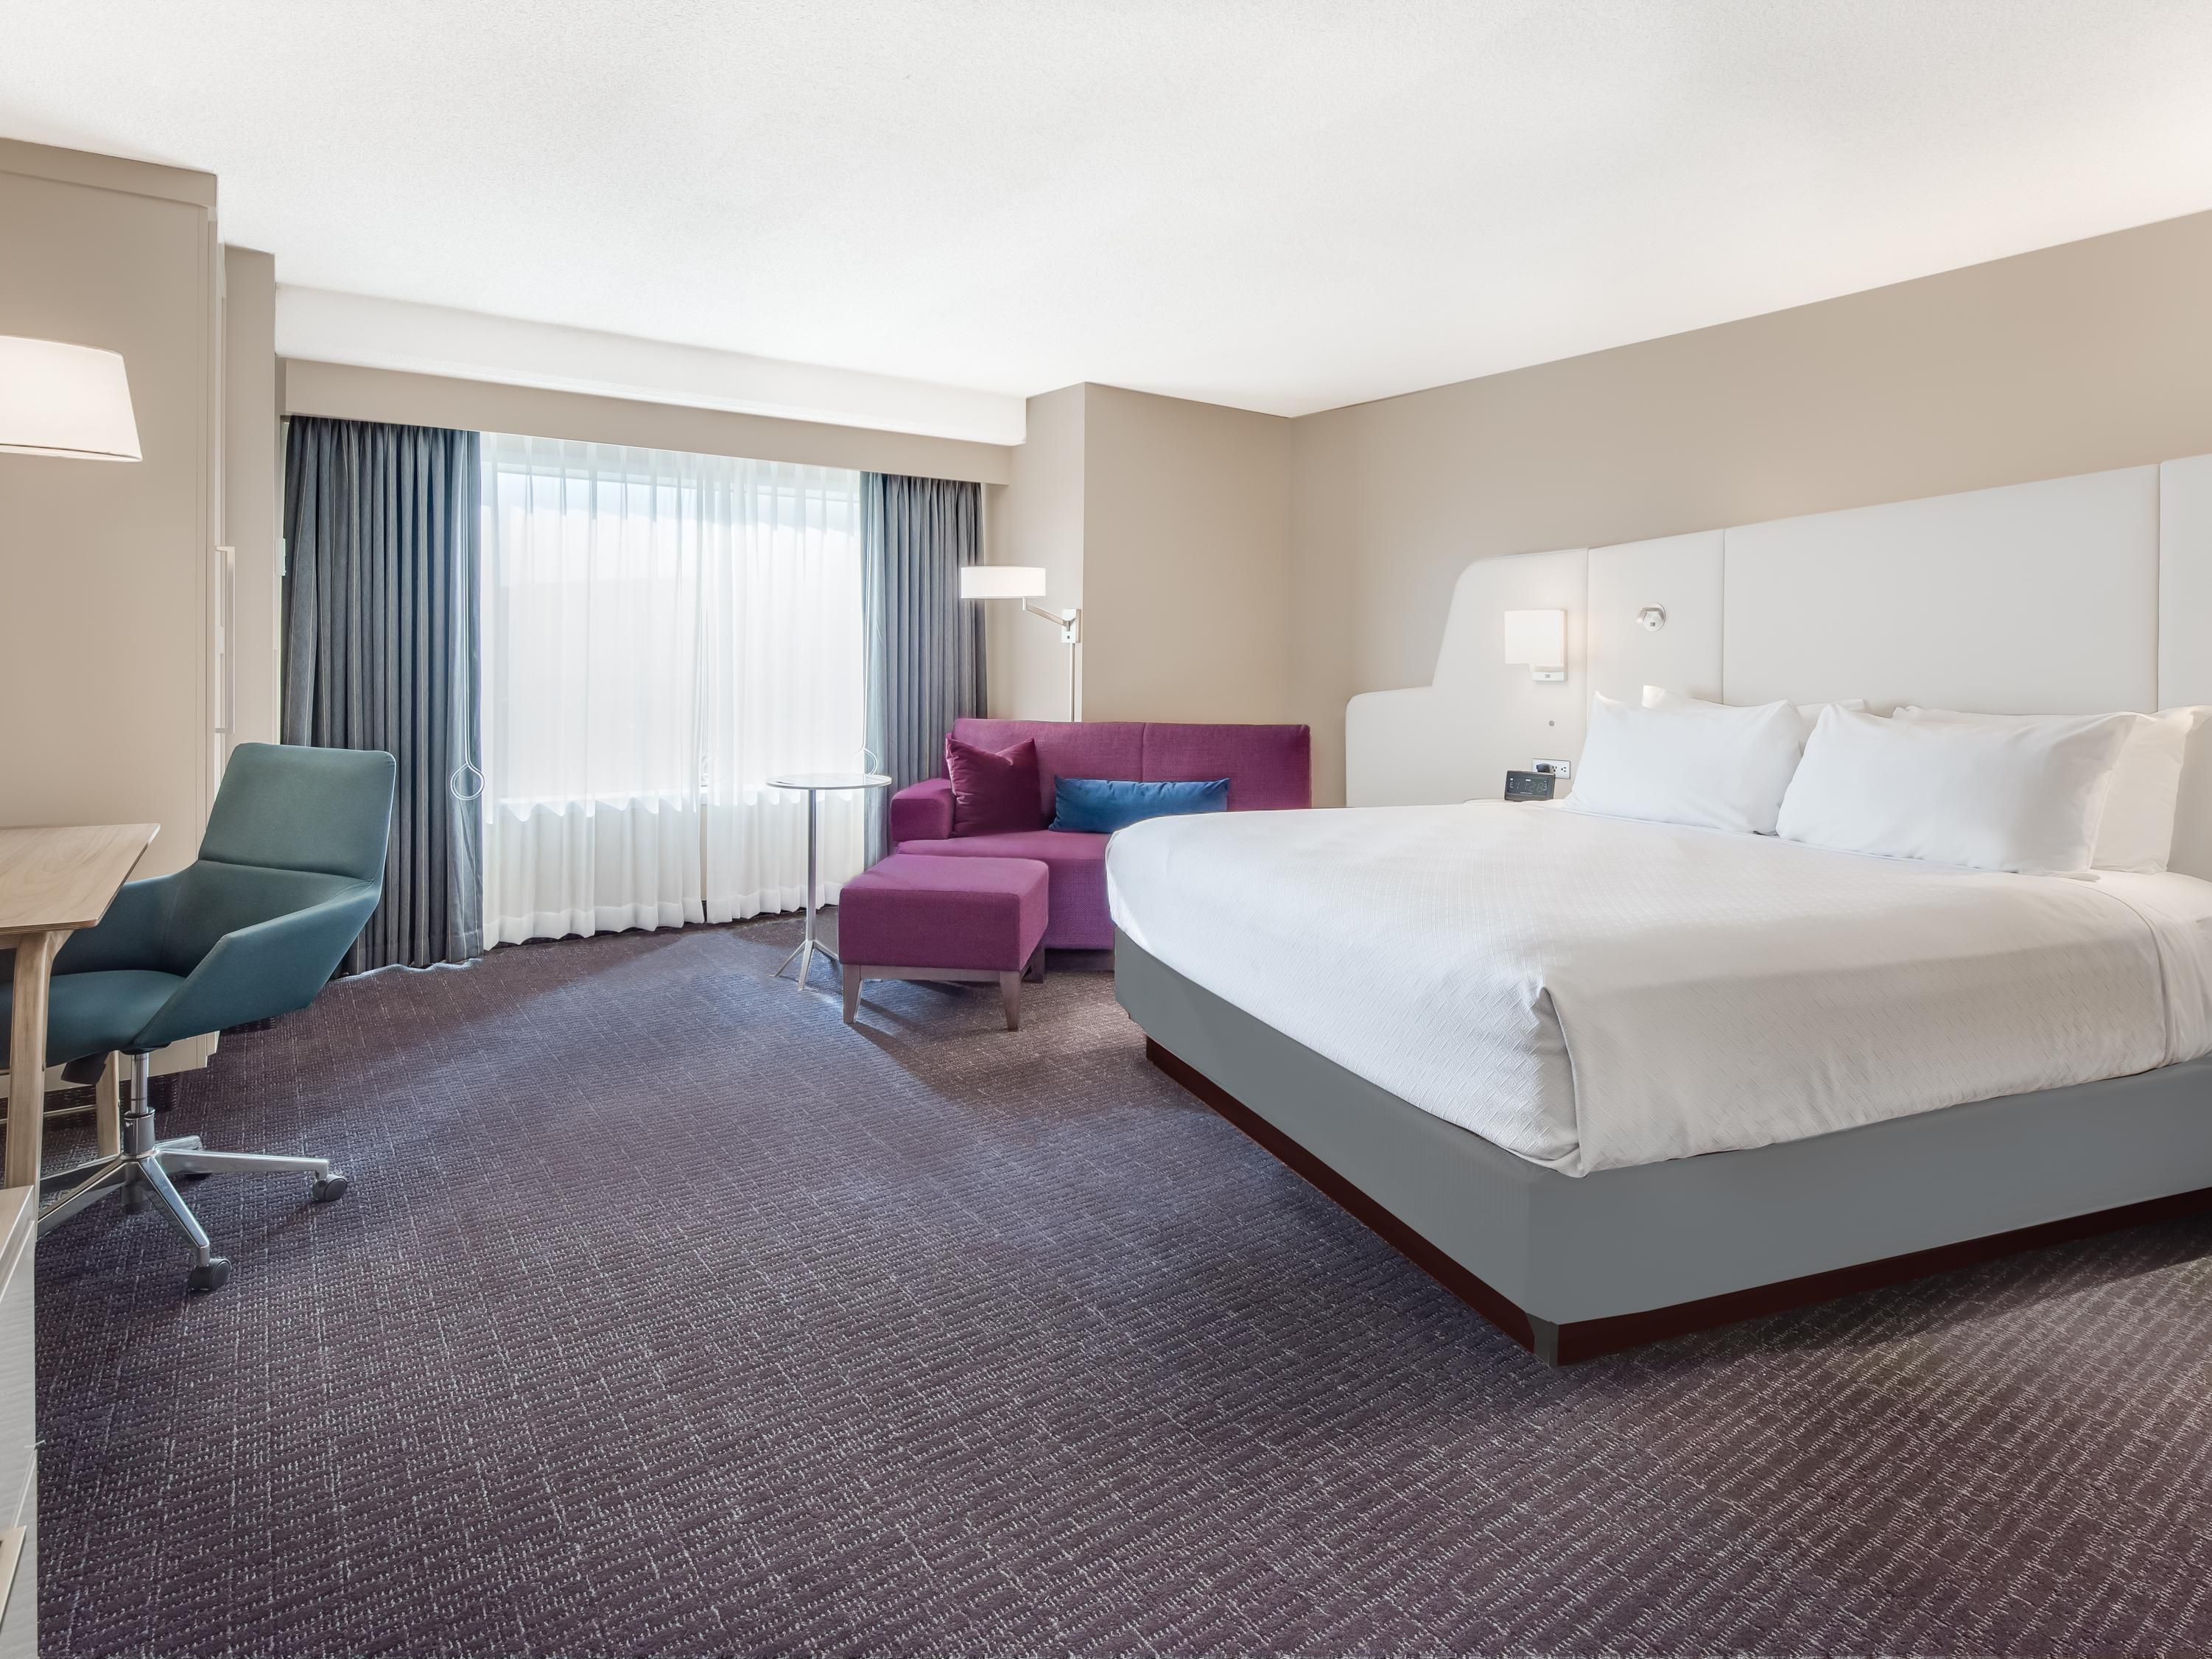 Guest rooms so advanced they earned a patent, our WorkLife rooms help you maximize productivity and relaxation with enhanced connectivity and comfort. The dynamic sofa nook is ideal for both working and unwinding, while the cocooning headboard, plush linens, and mattress lead to sweet dreams. 
